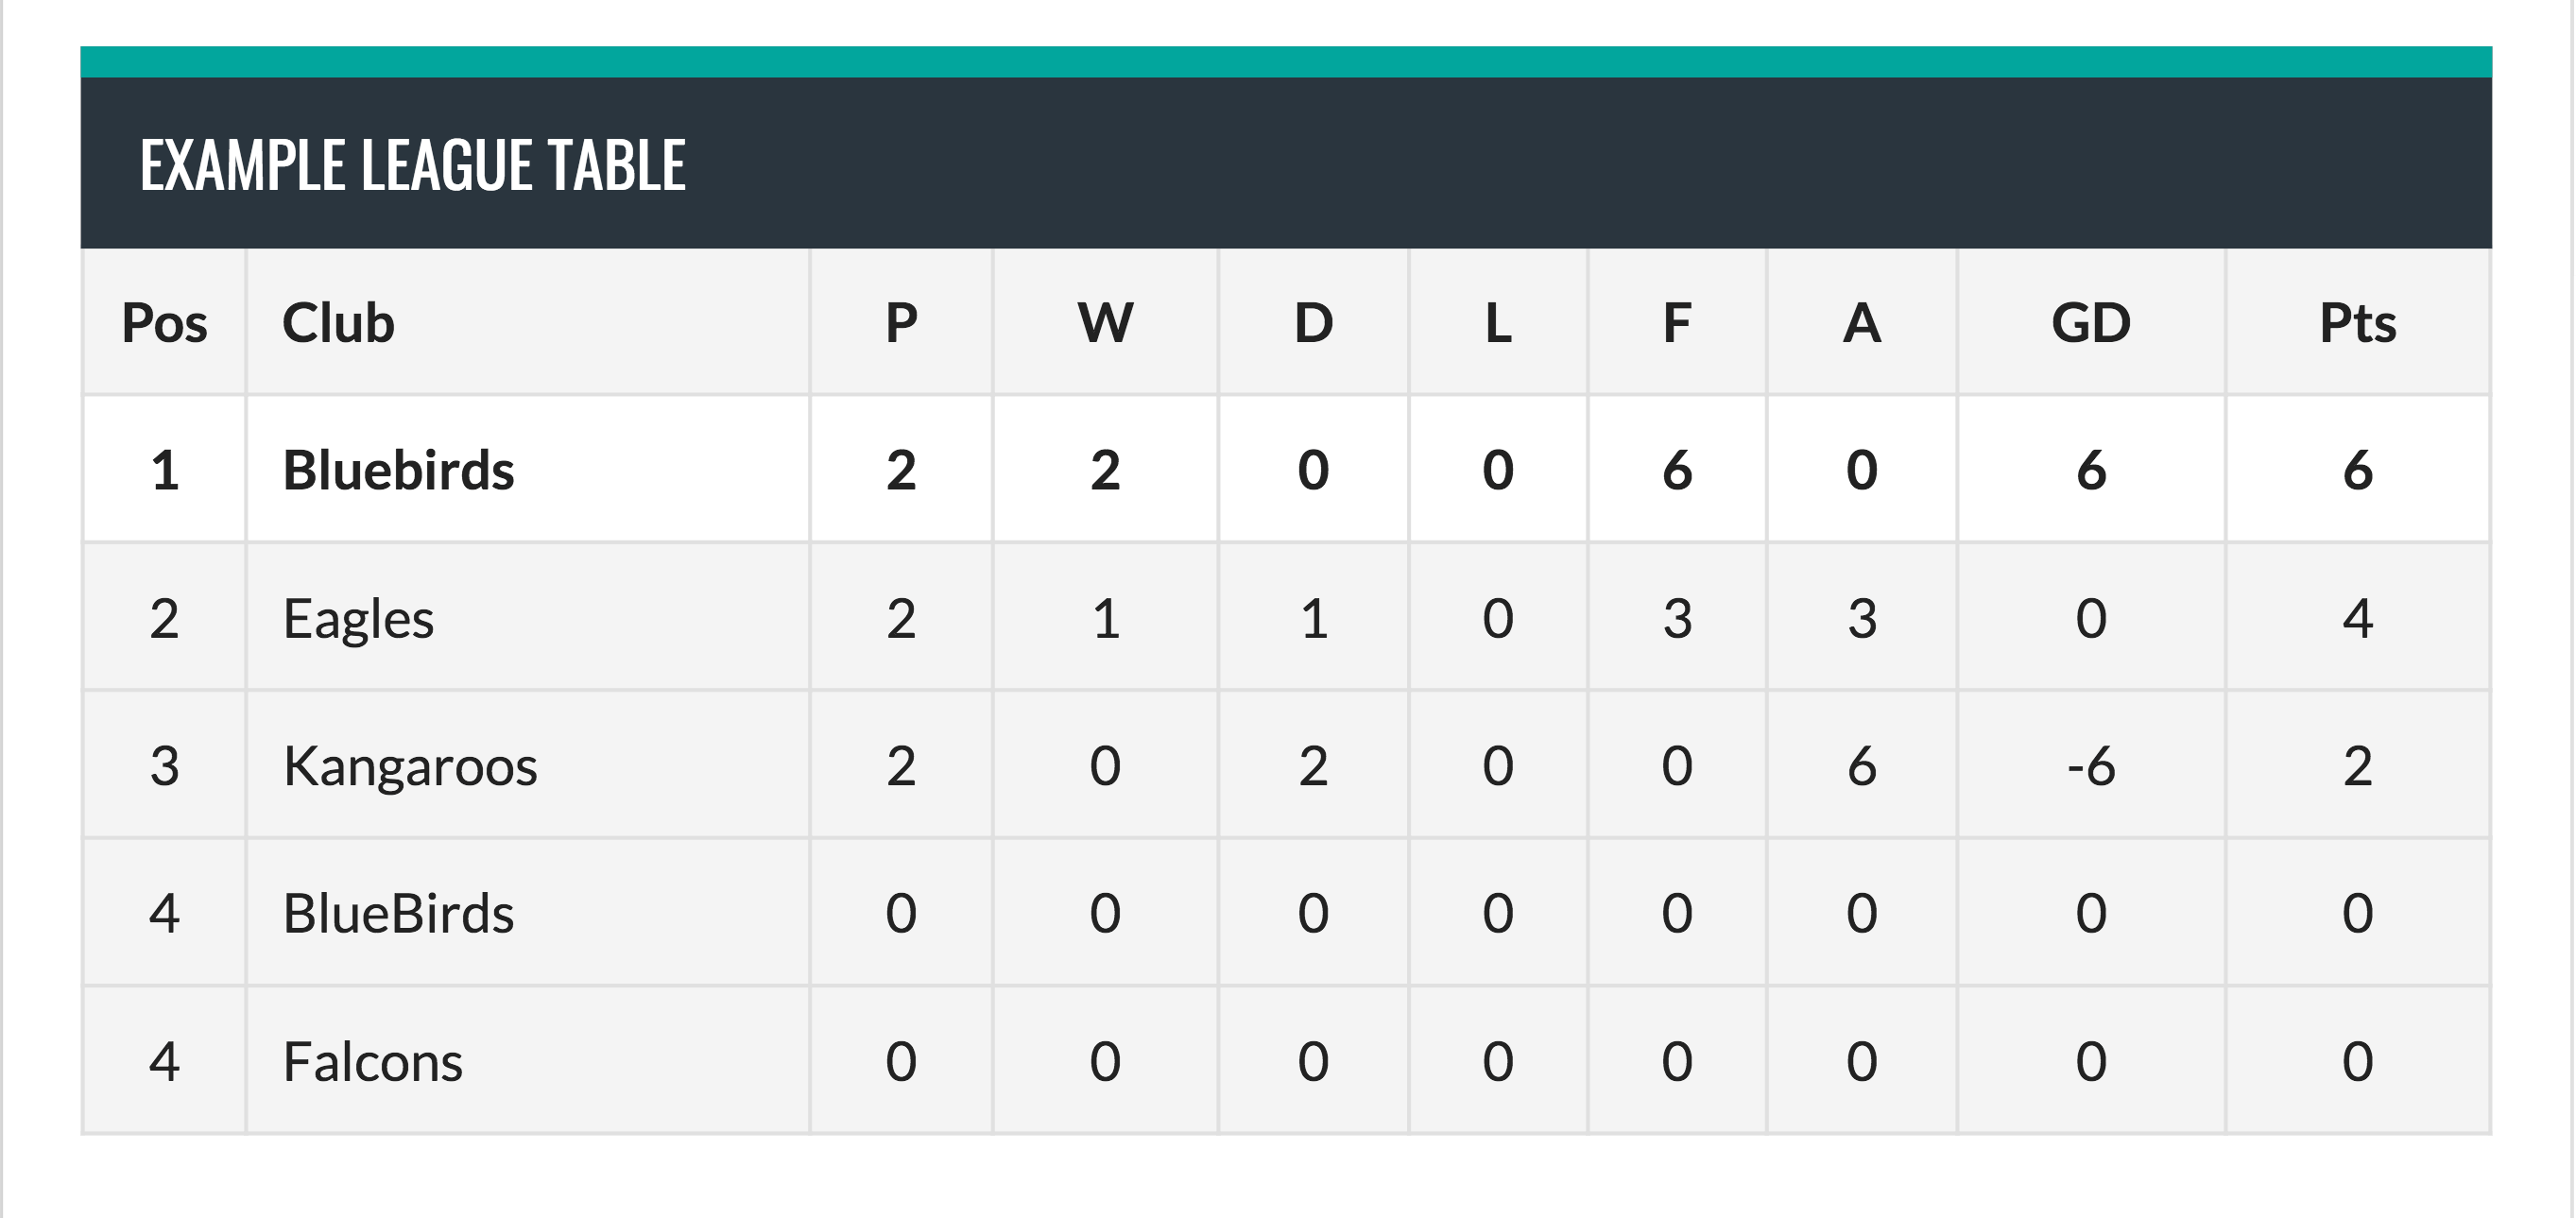 Example of a league table